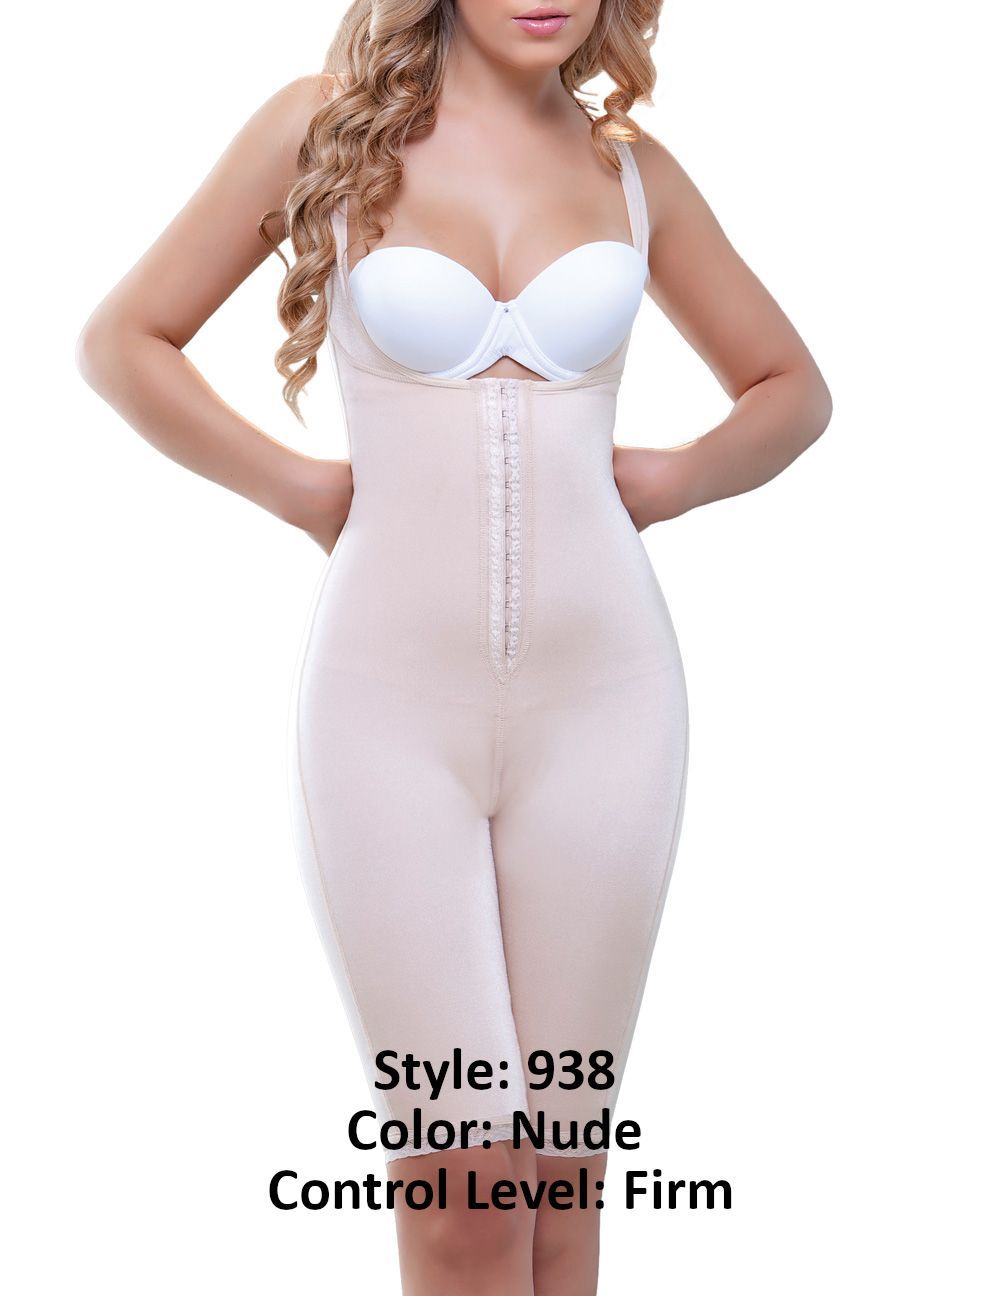 Vedette 938 Full Body Control Suit w/ High Back Color Nude – D.U.A.